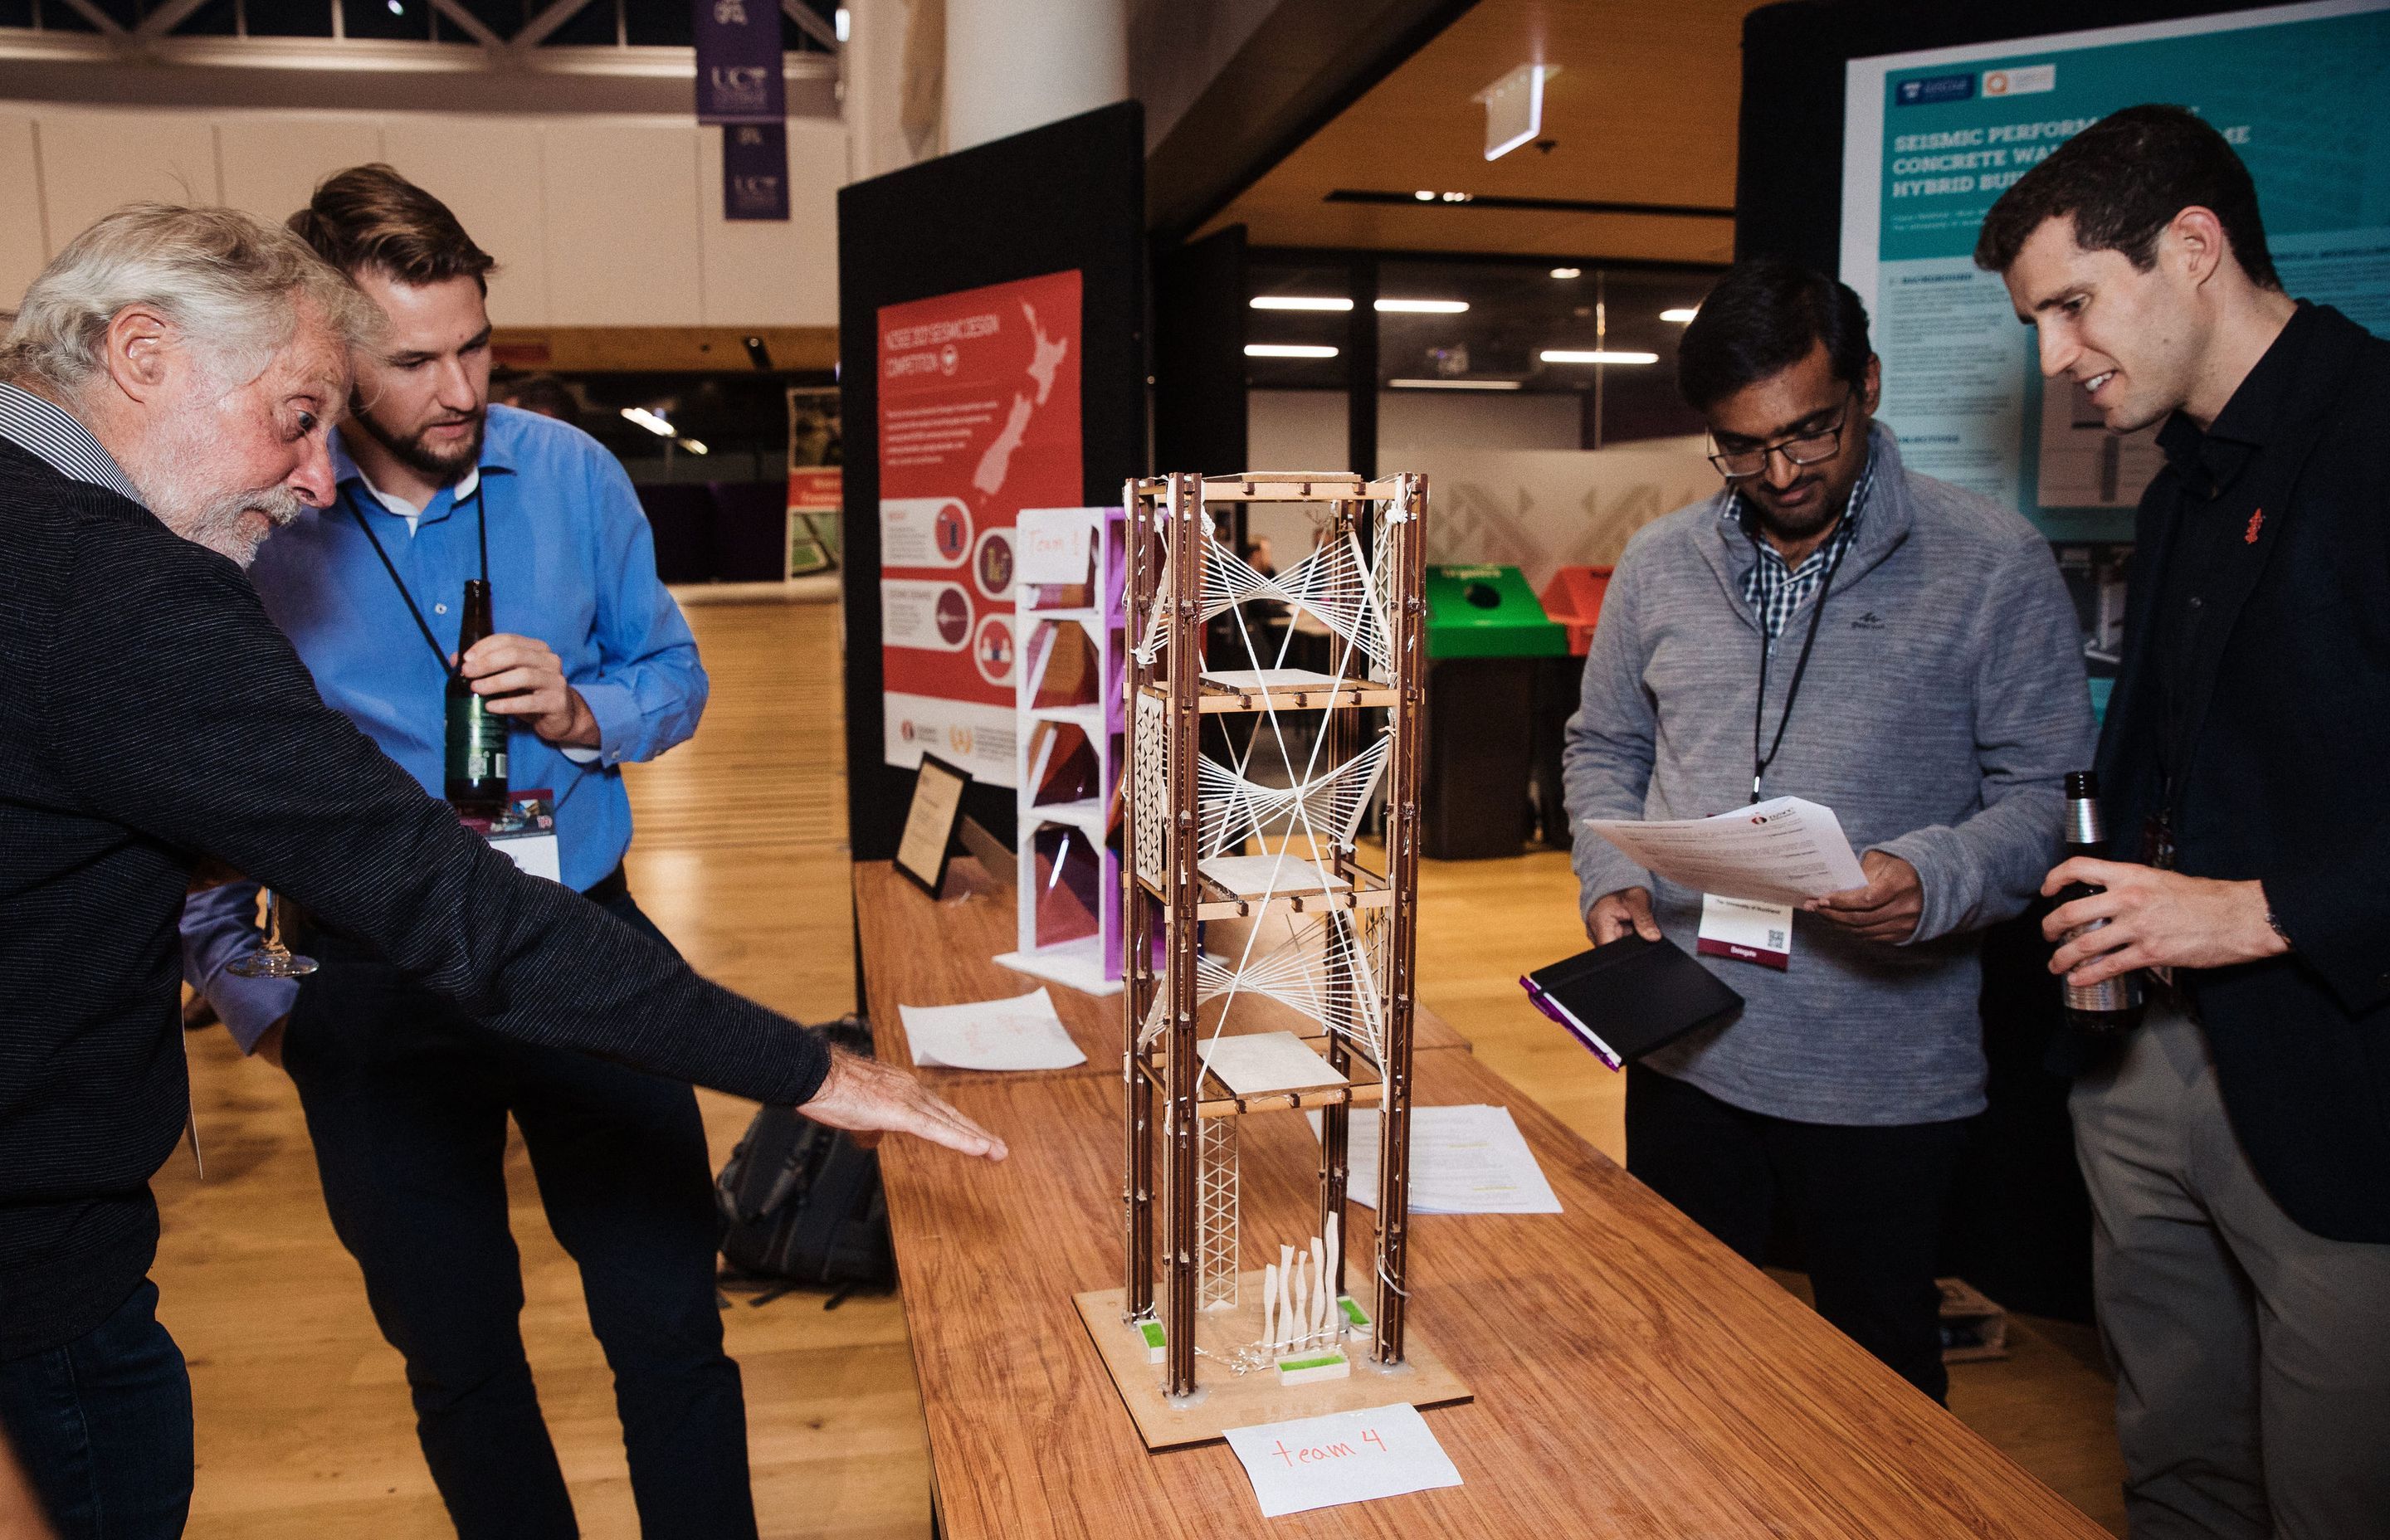 NZSEE organised a design competition in which teams of young professional engineers and post-graduate students designed and constructed a scale model building, which were then tested for seismic resilience at the conference.